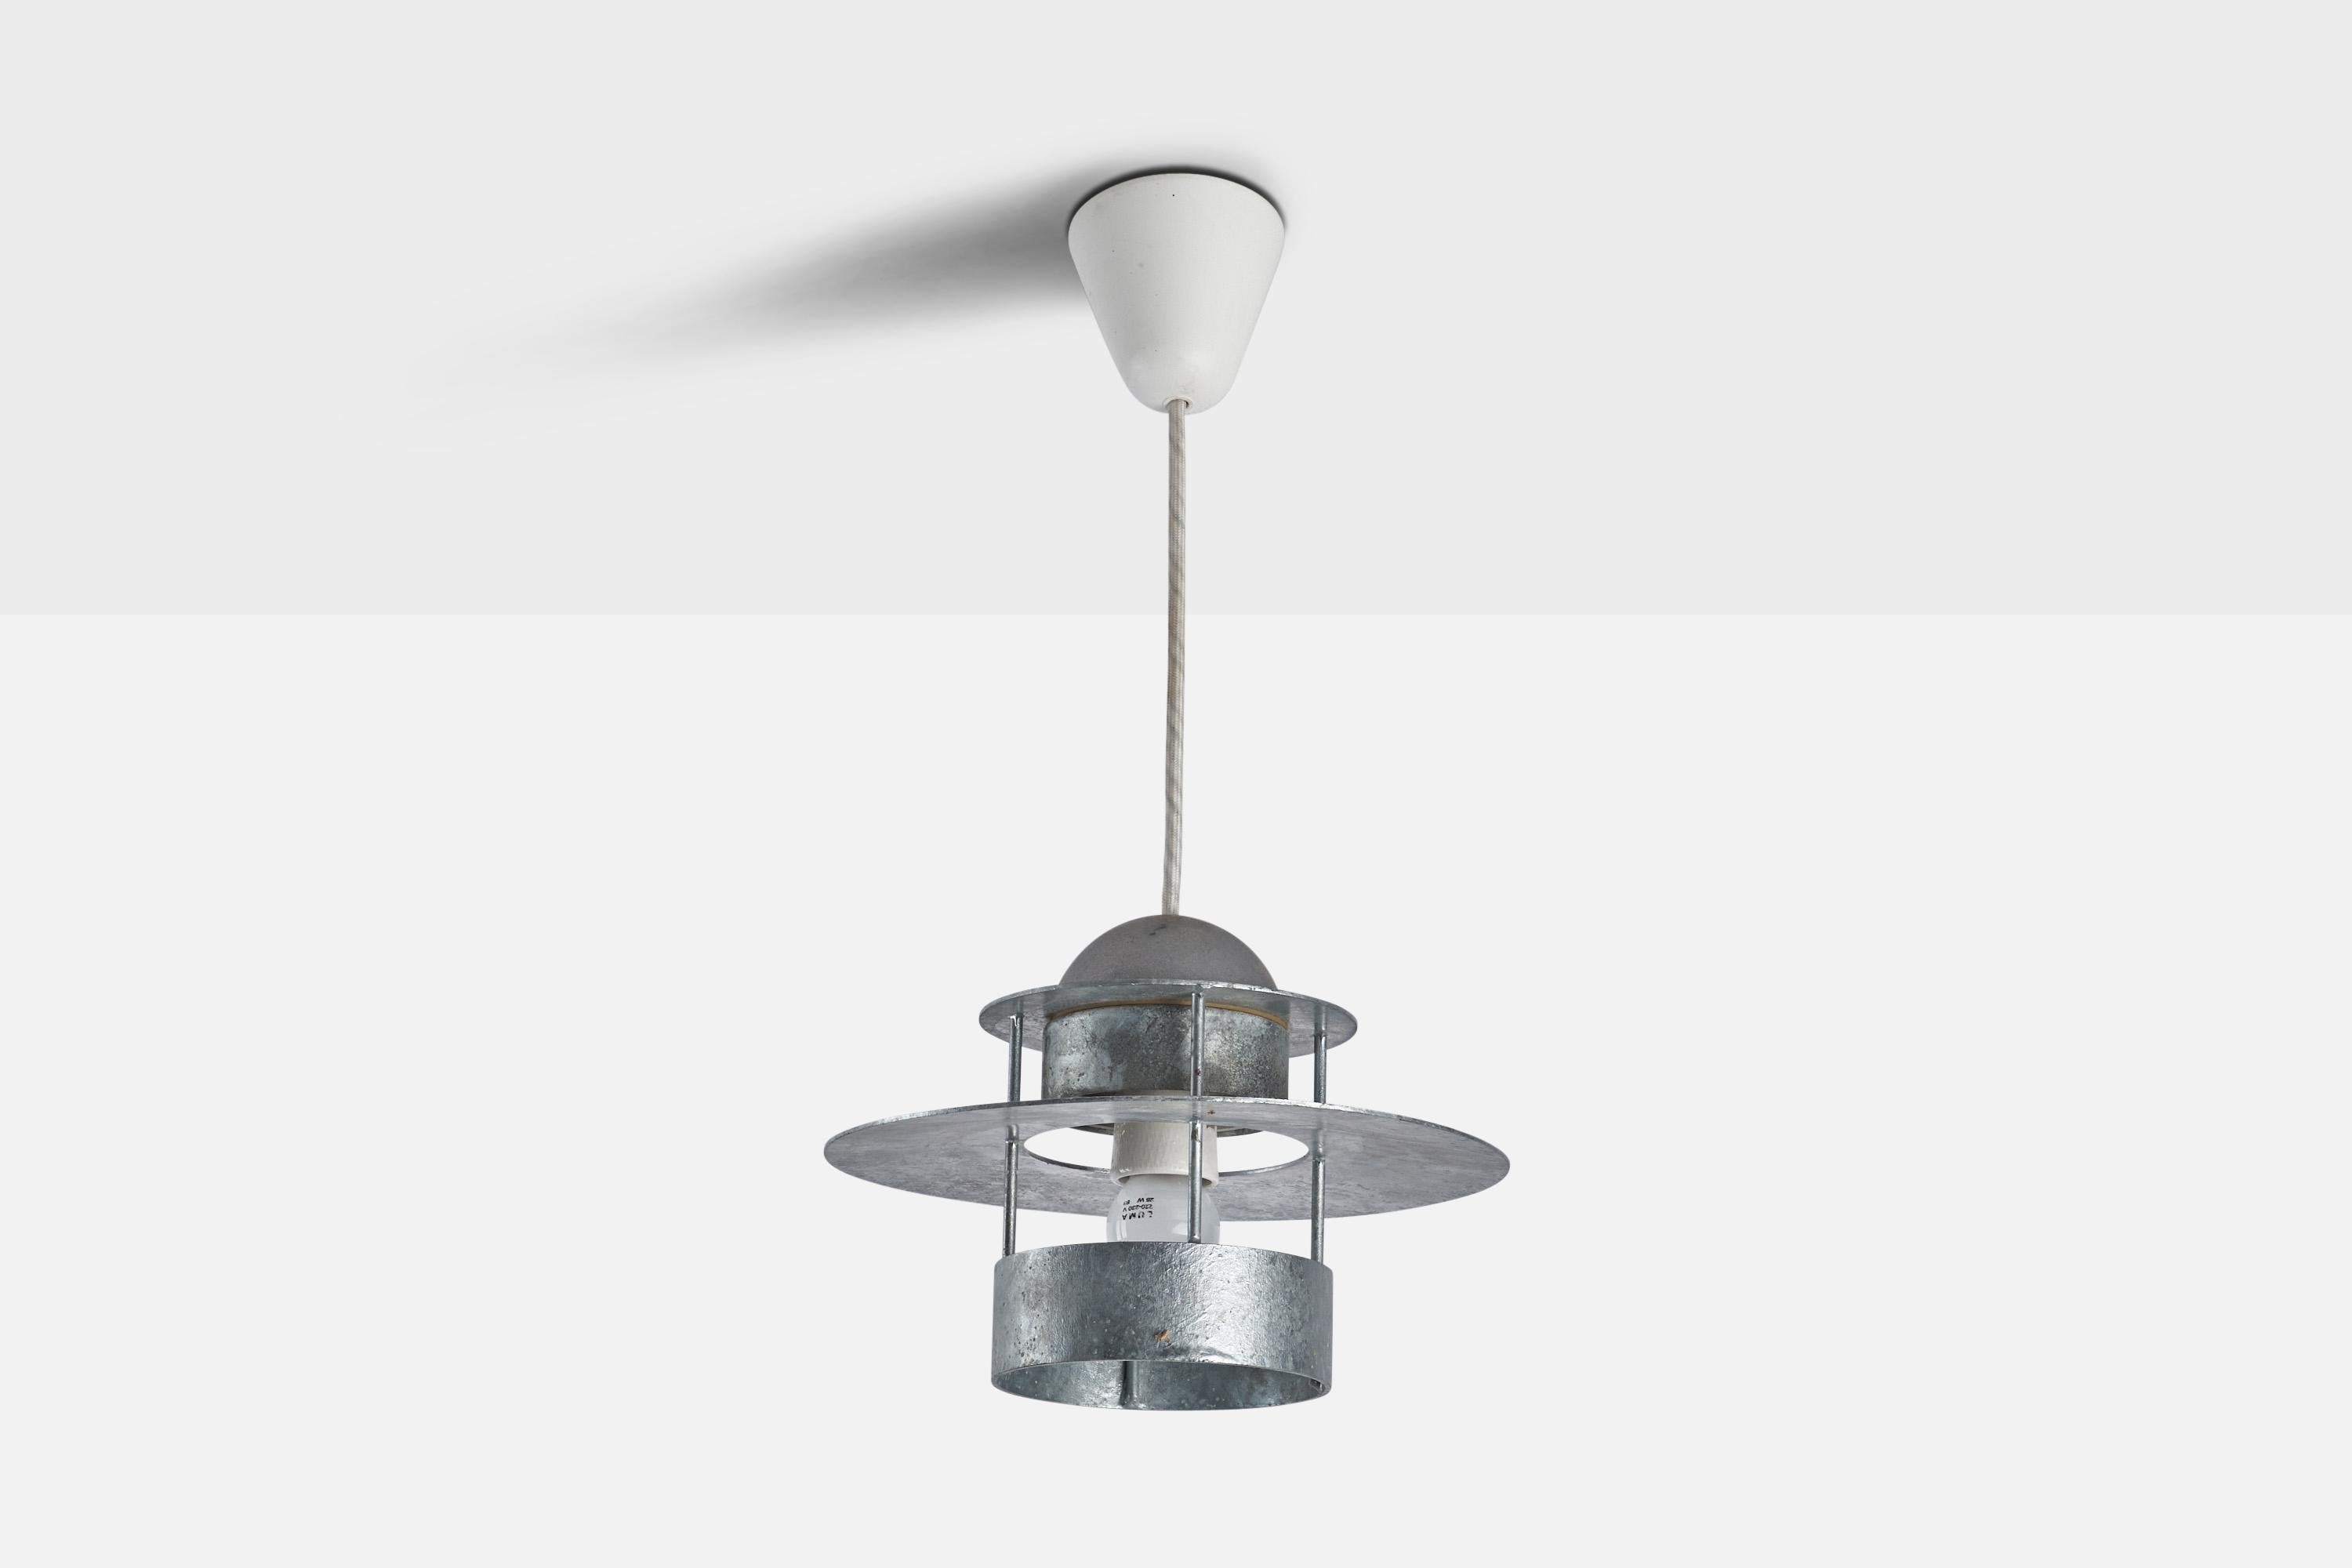 
A galvanised steel pendant light designed by Jens Møller-Jensen in 1963 and produced by Louis Poulsen, c. 1960s.
Dimensions of canopy (inches) : 3.22” H x 3.52” Diameter
Socket takes standard E-26 bulb. There is no maximum wattage stated on the